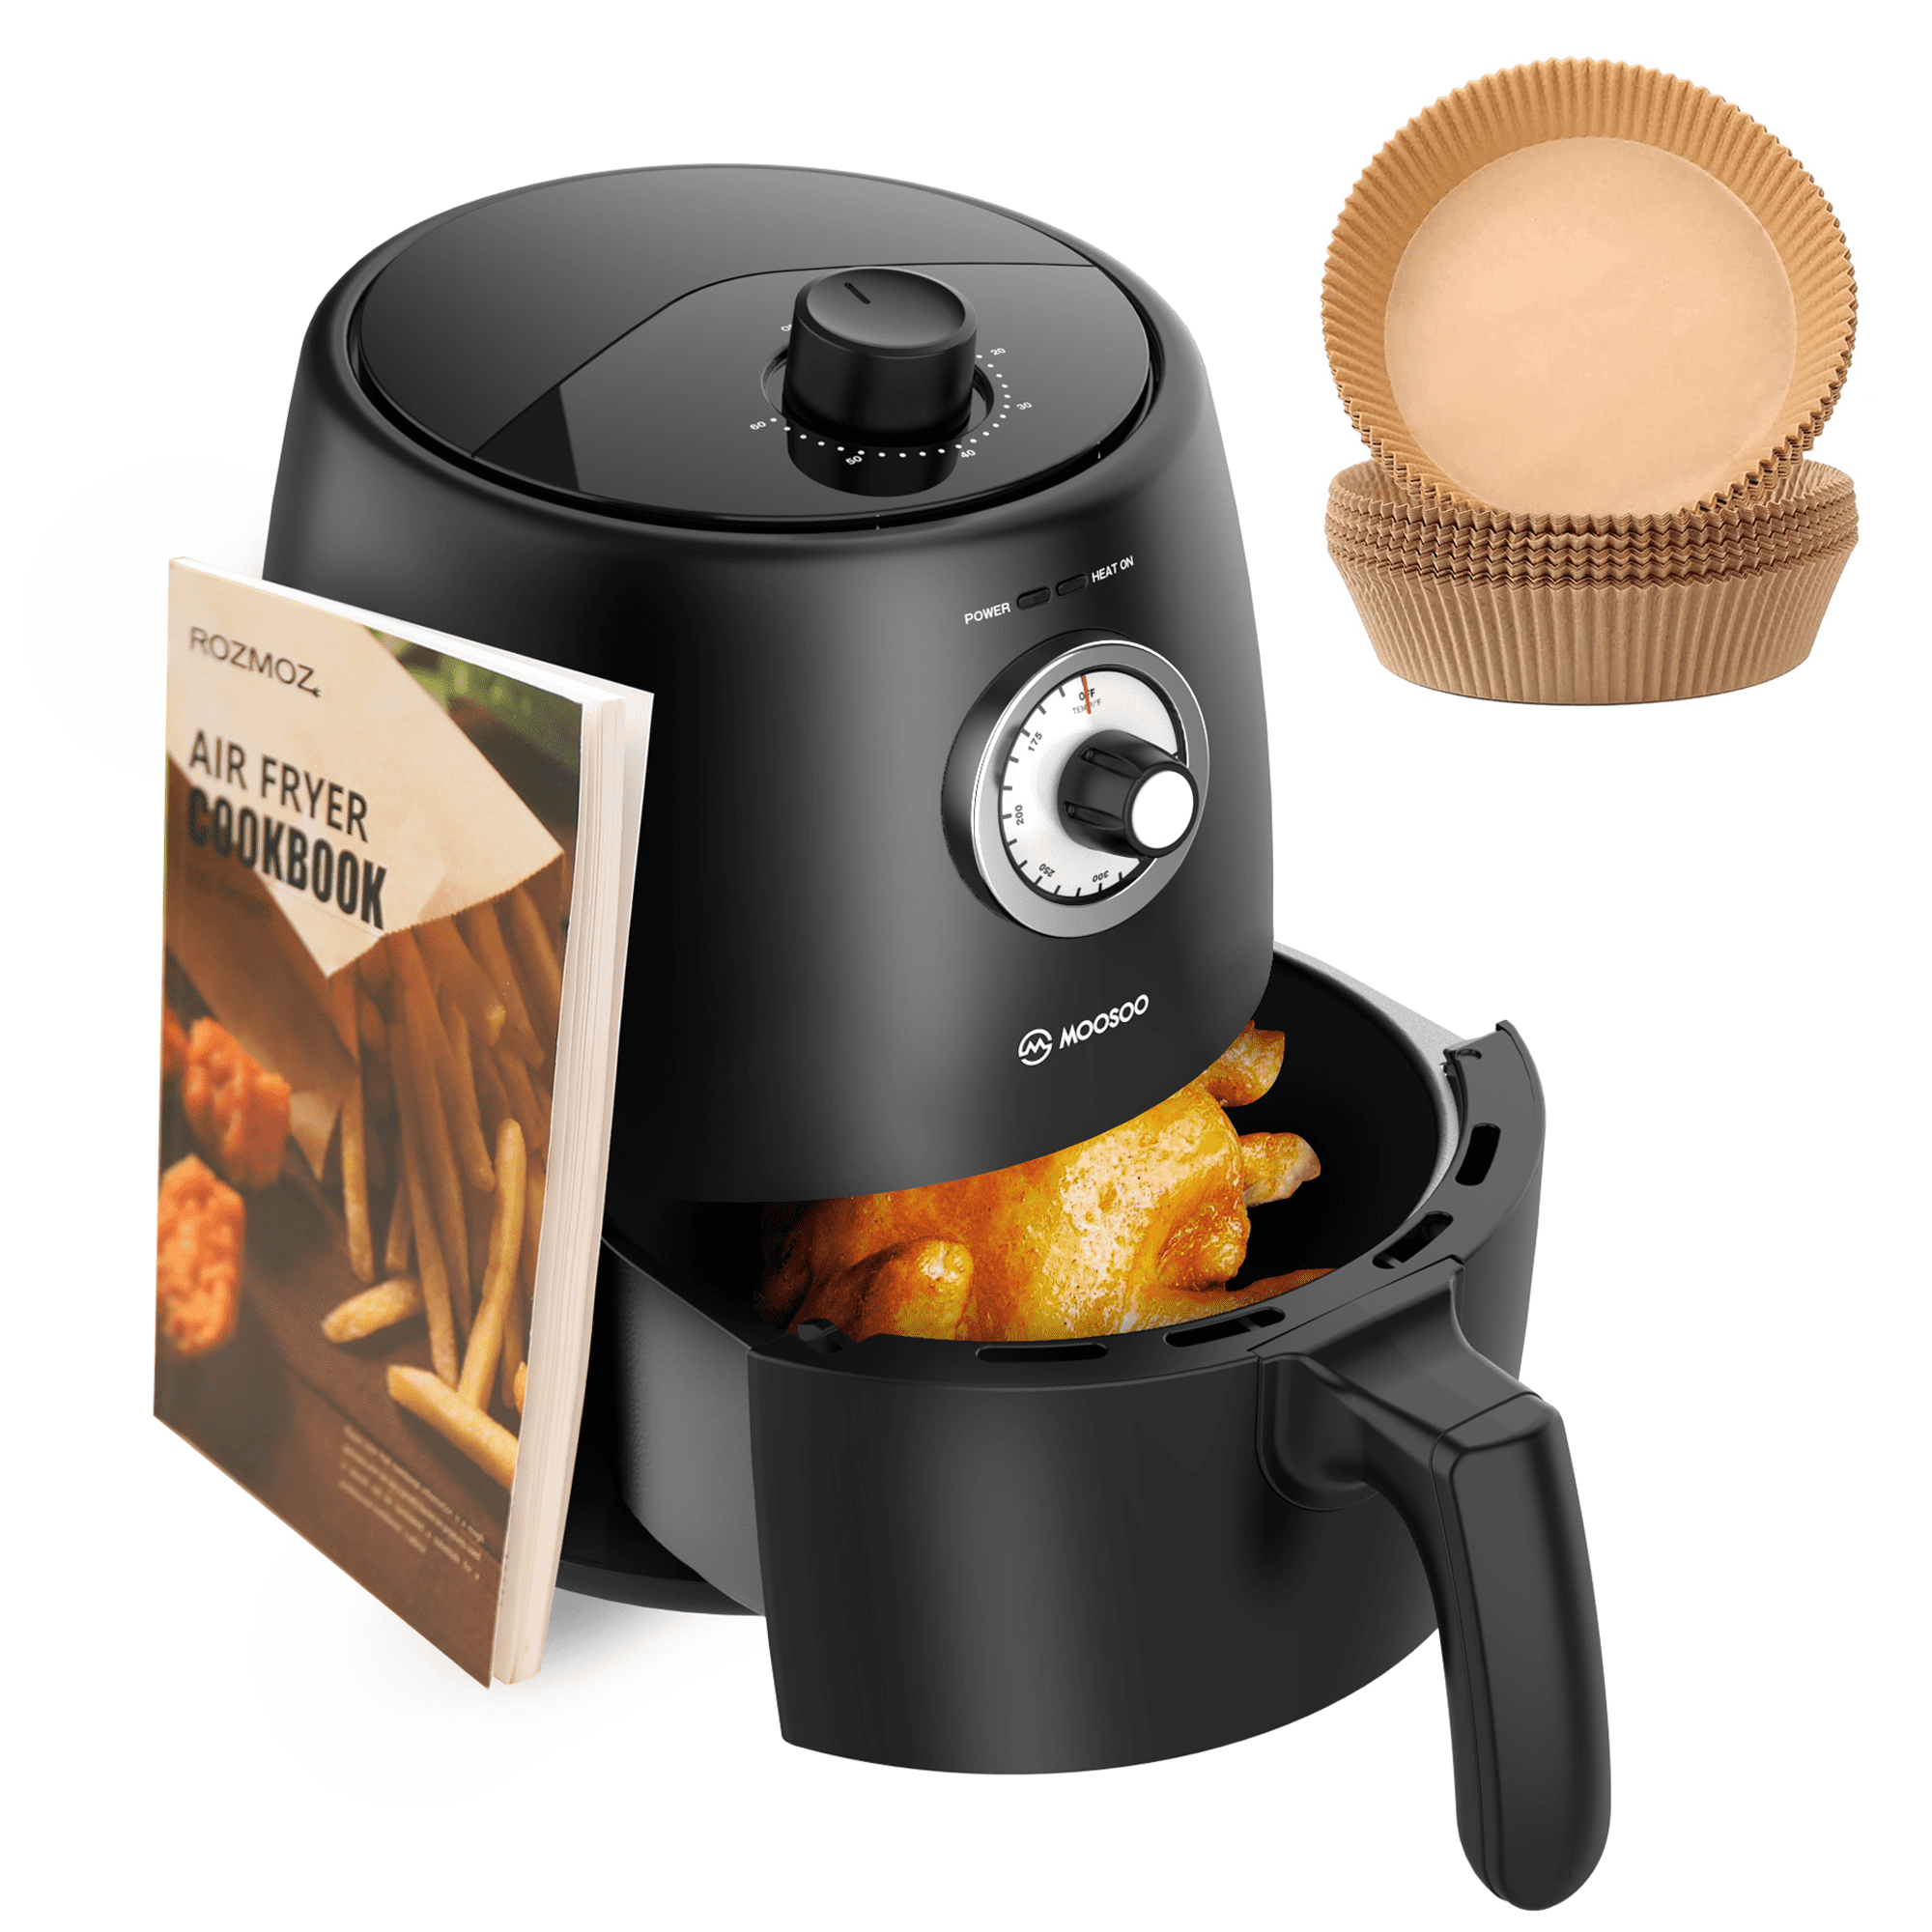 Cosori Smart Air Fryer review: Using lockdown to eat healthier